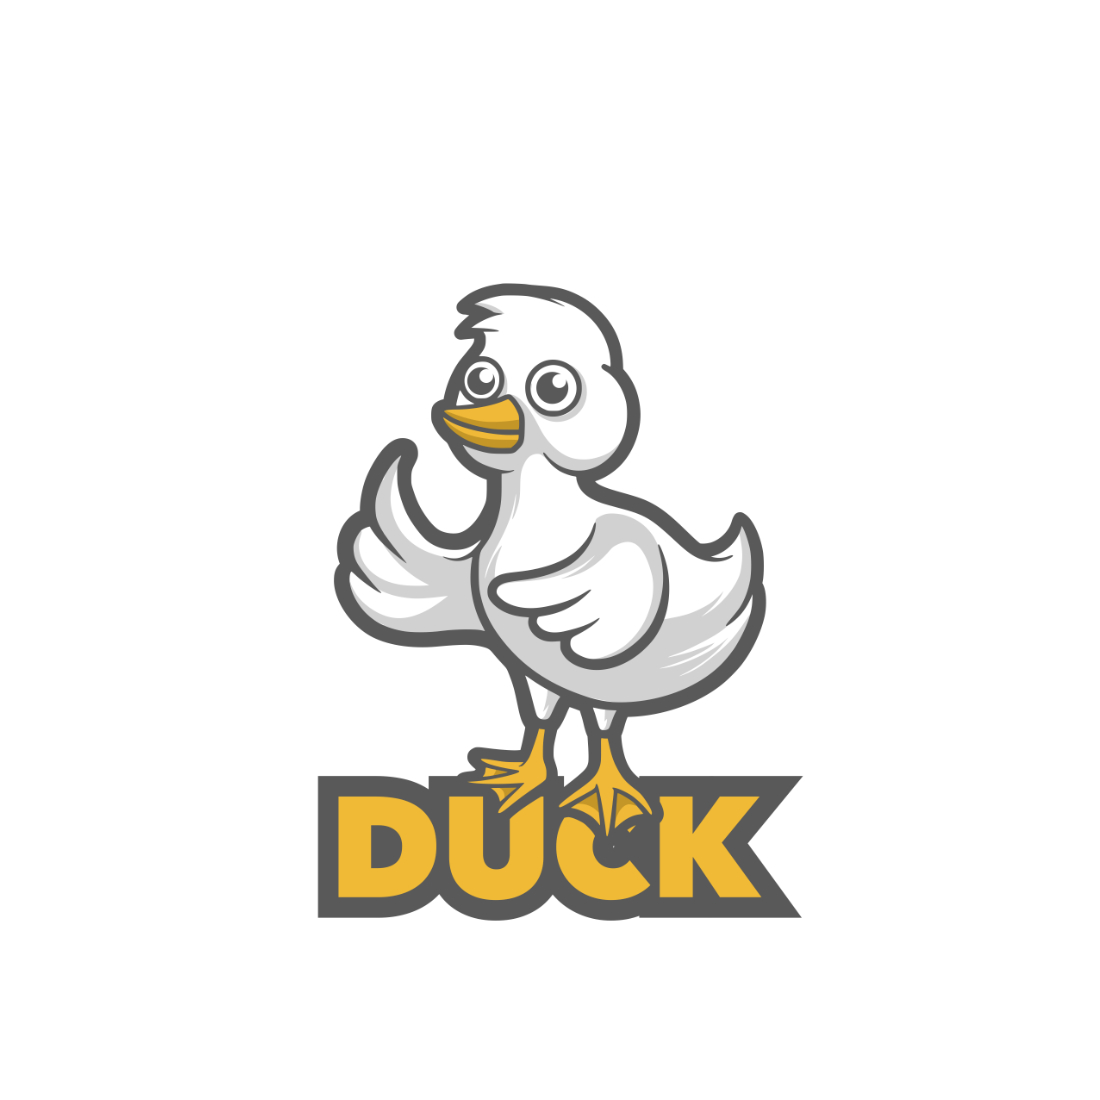 Duck logo with the word duck on it.